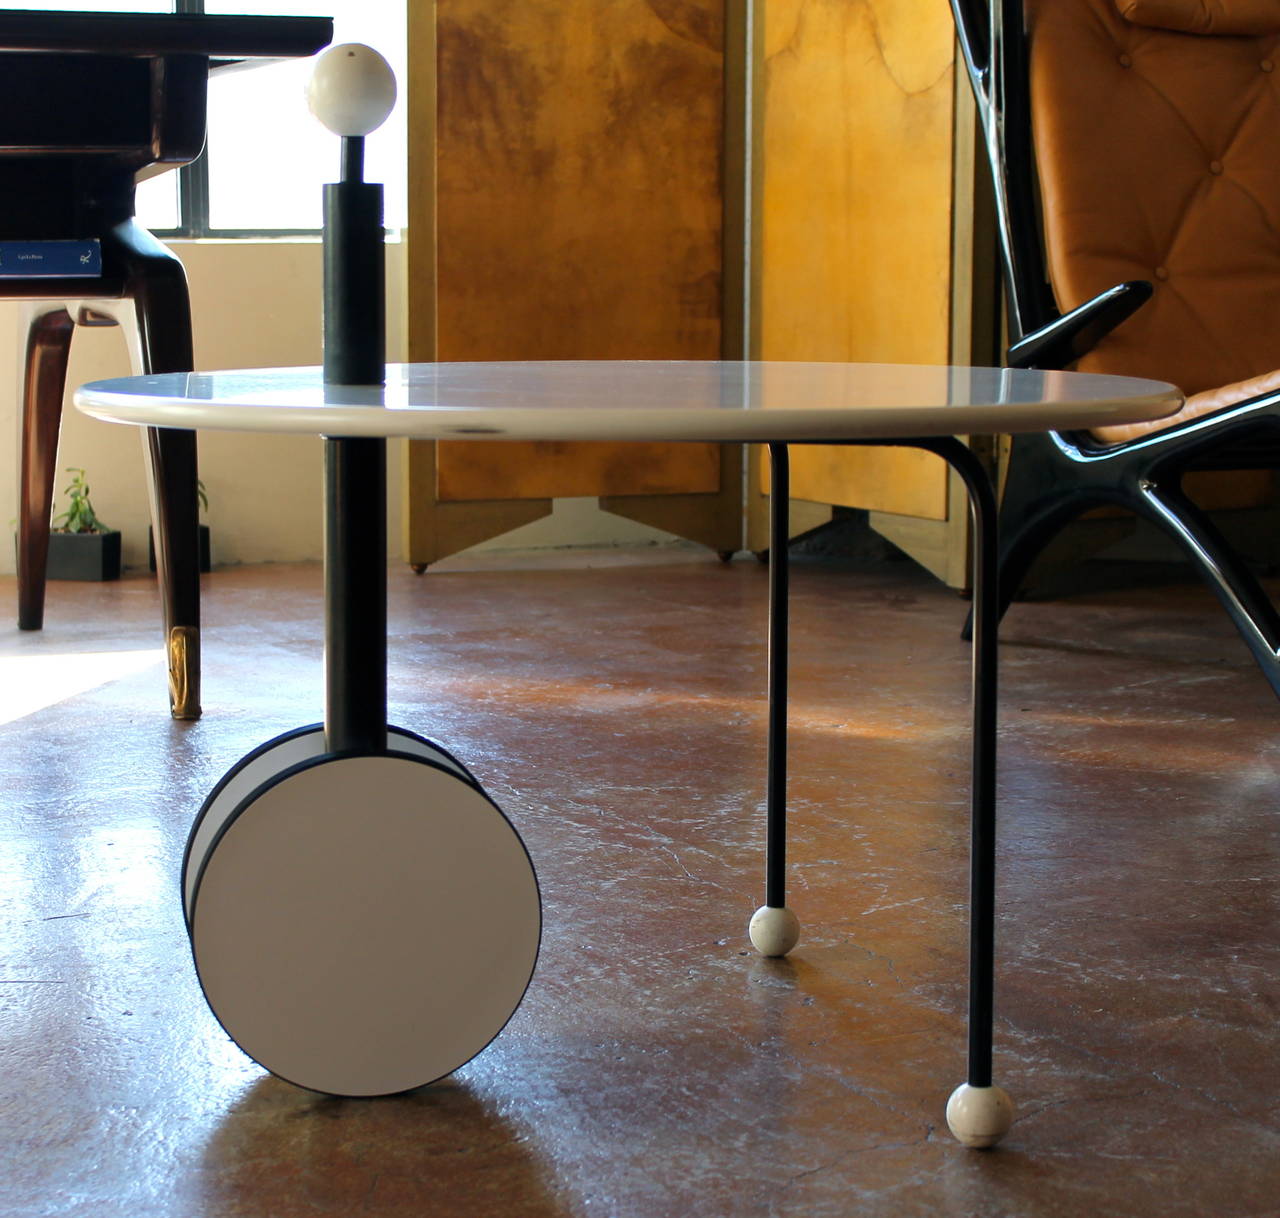 A wonderful and rare table by Michele De Lucchi. White lacquered laminated wood table top with a rolling base and balls on feet and on outcrop. The wheels turn and are lined with rubber.
Black painted steel frame.

Michele De Lucchi was born in